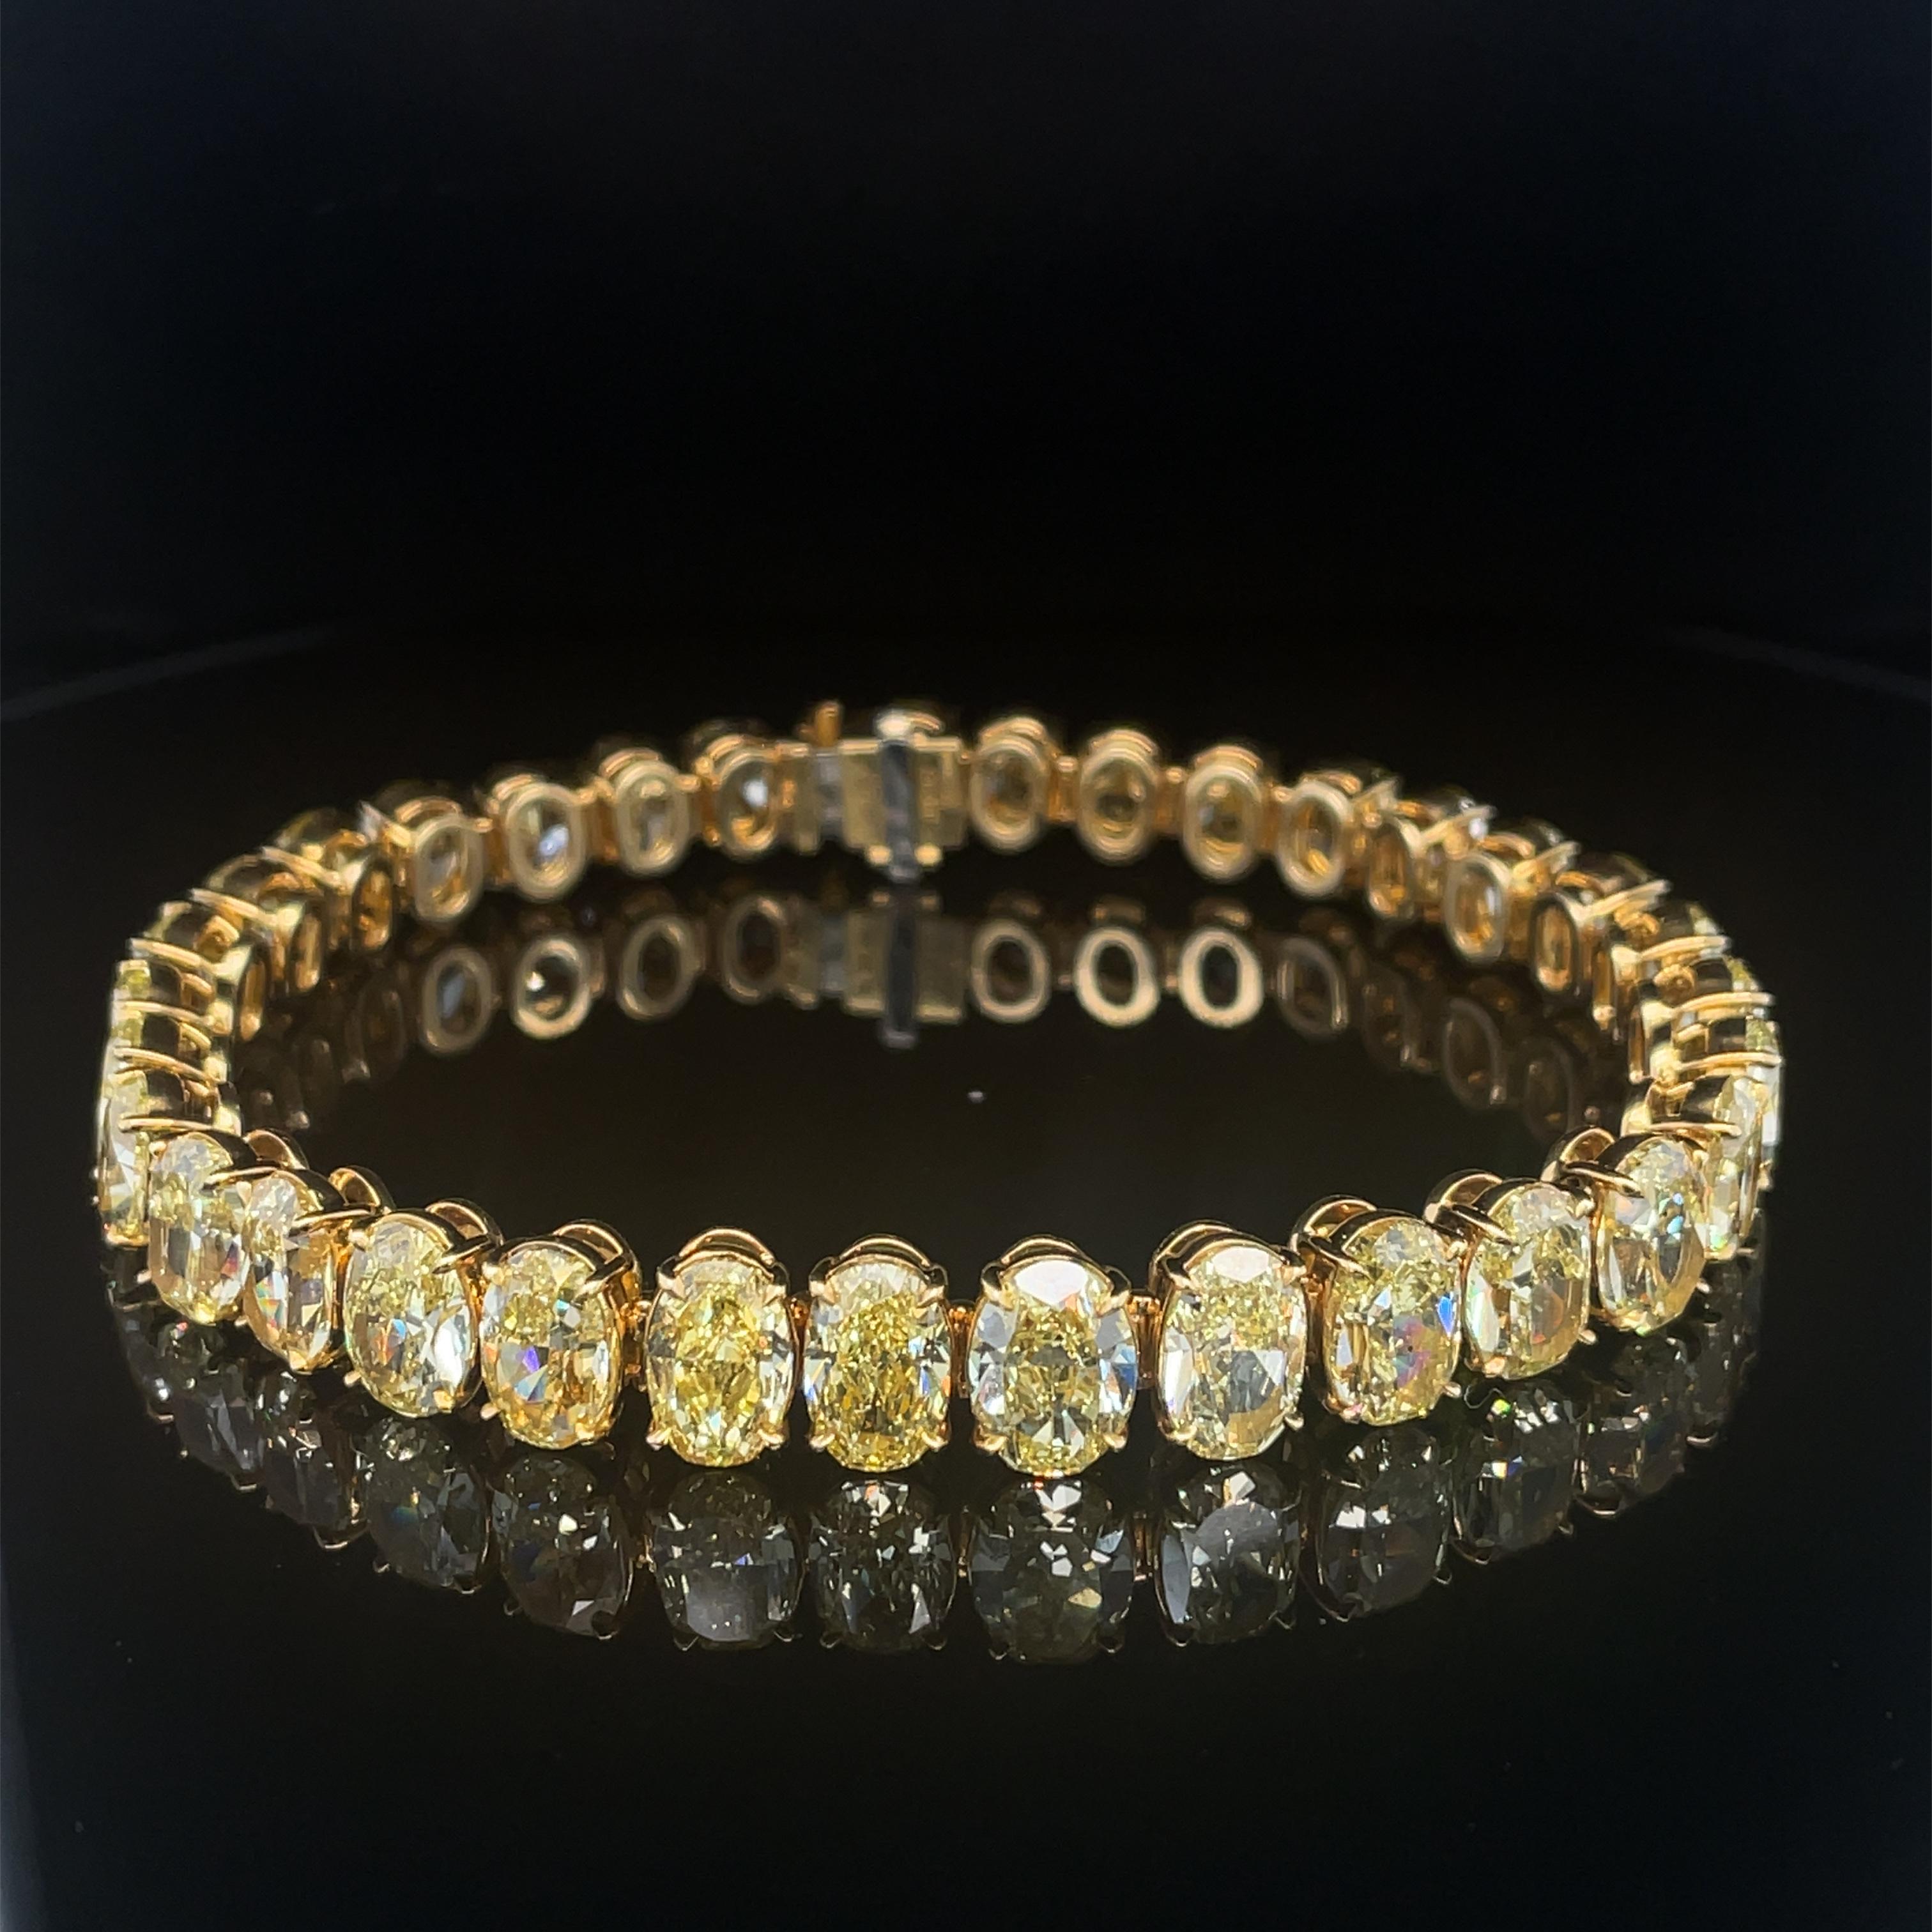 33.52cttw Fancy Intense Yellow oval Diamonds 
set in 18KYG 
with 33 psc diamonds = 33.52cttw, GIA certified